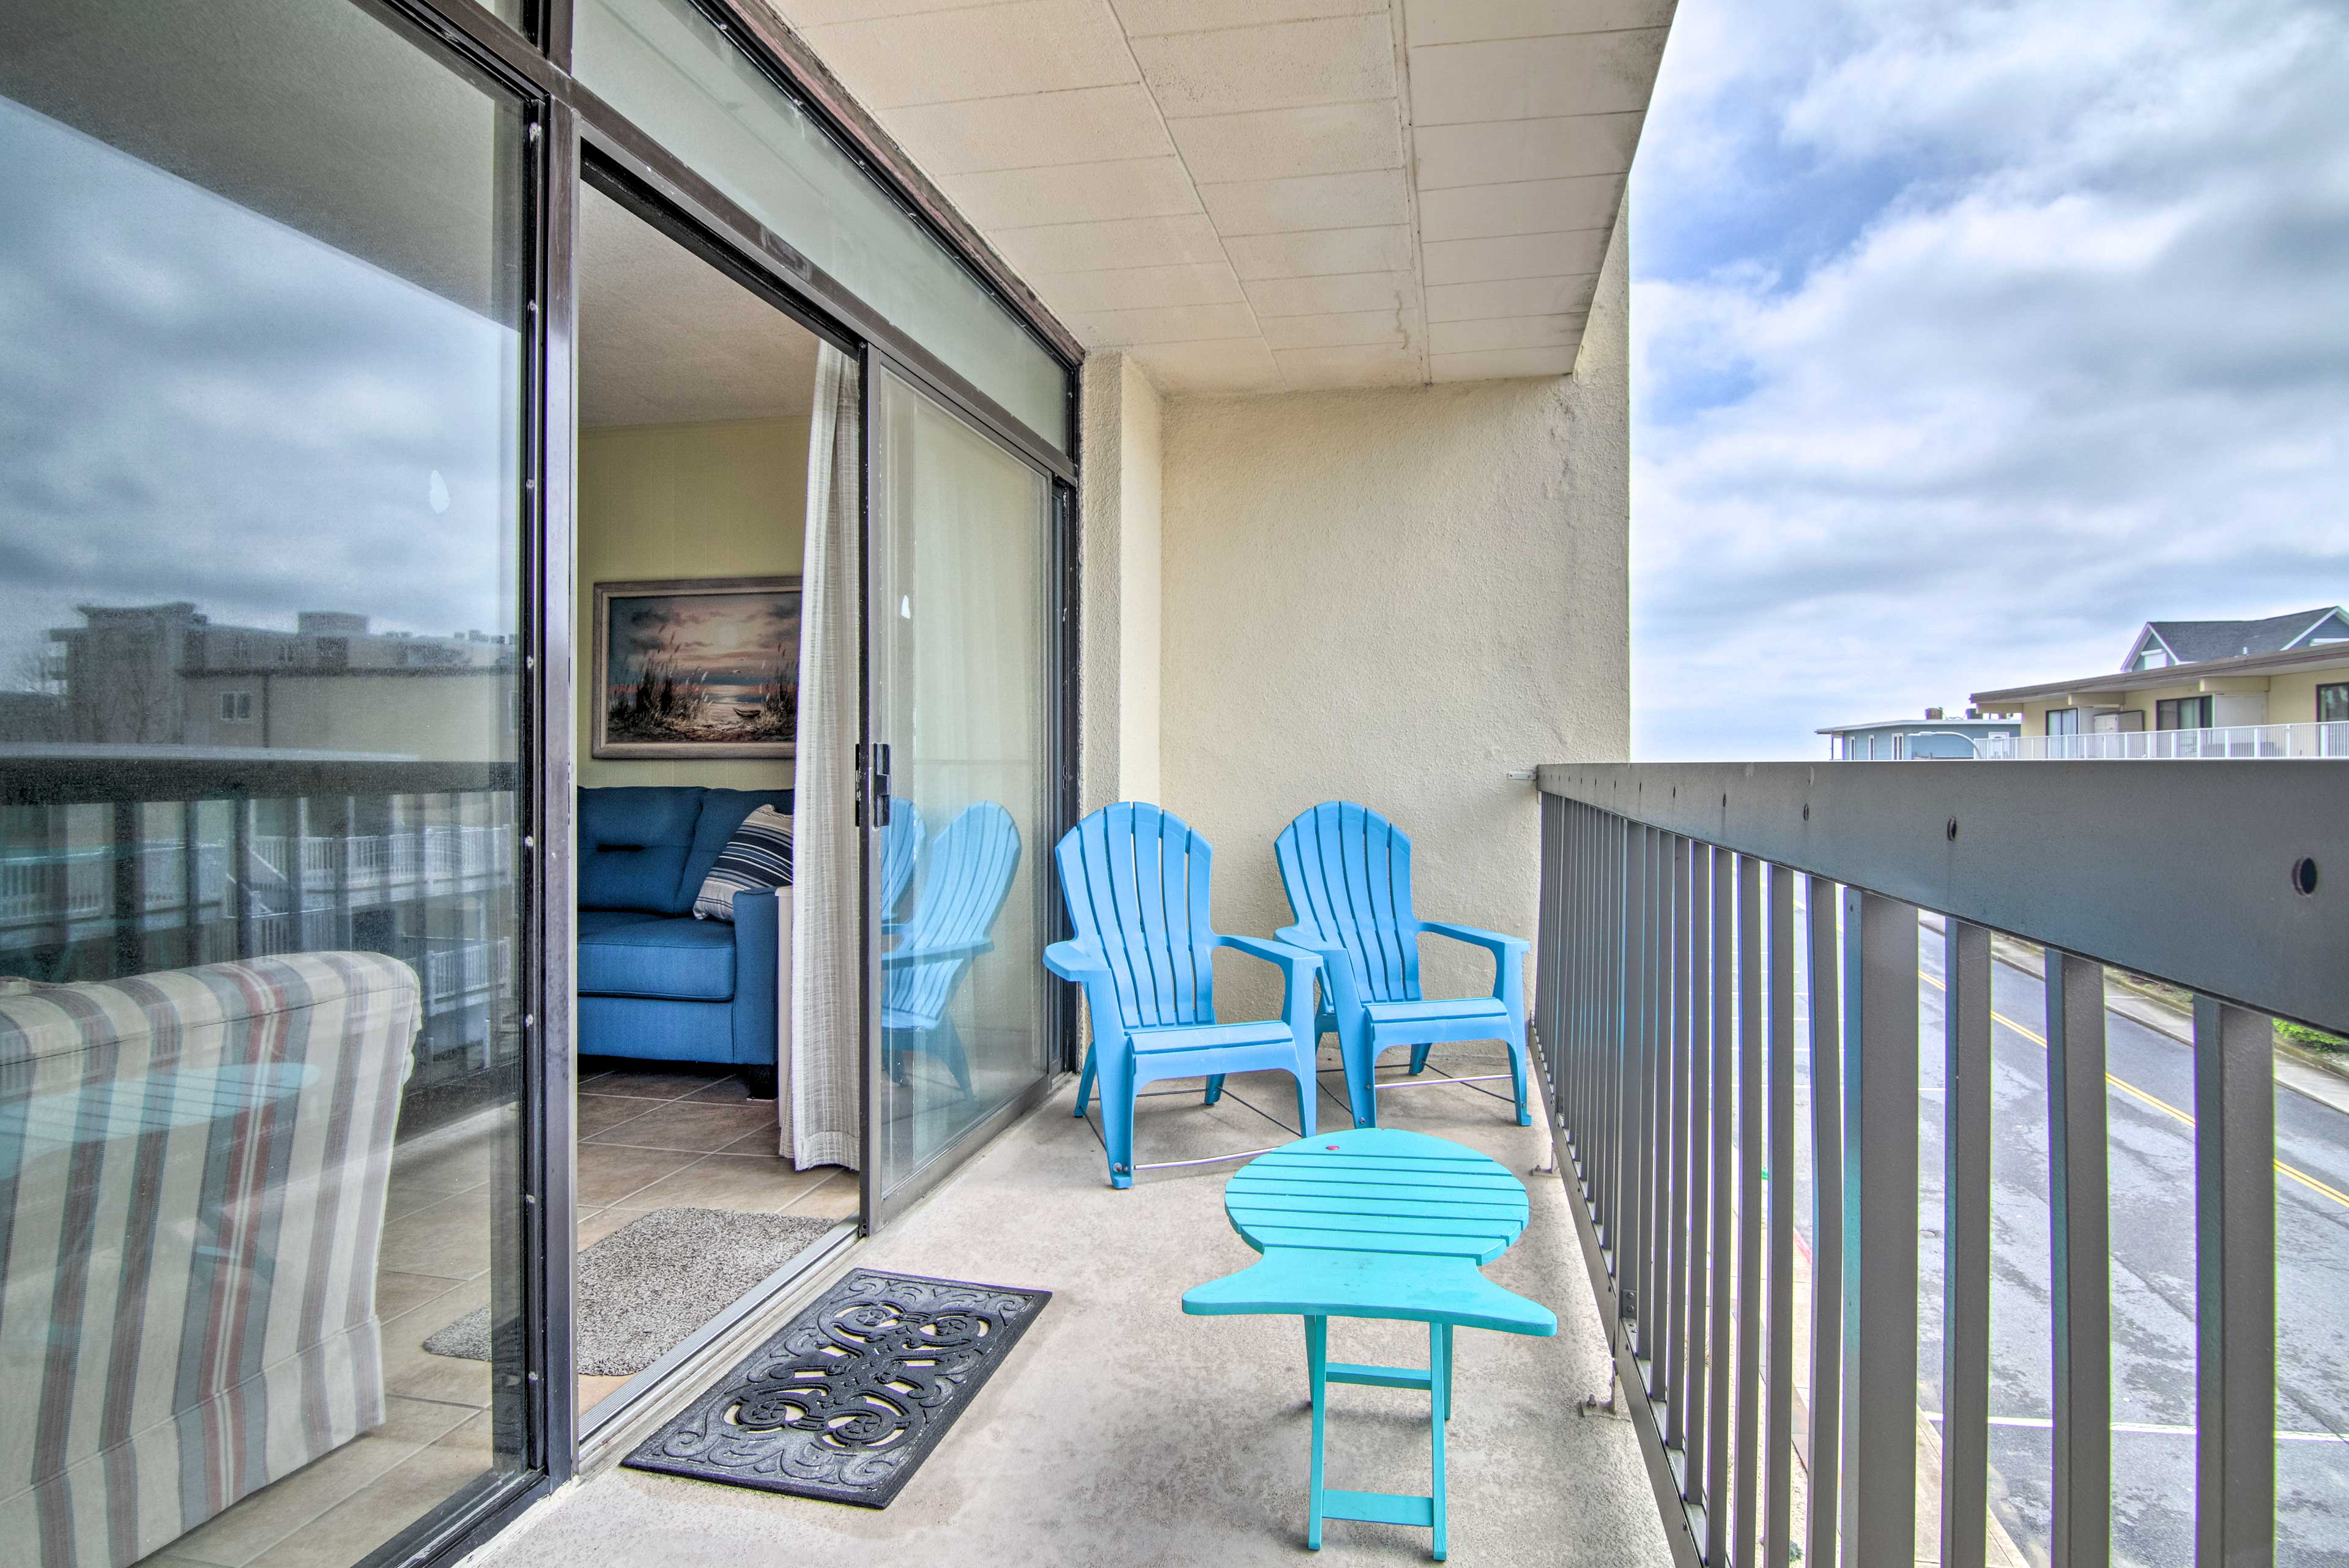 Guests can walk right onto the beach at this Ocean City condo.